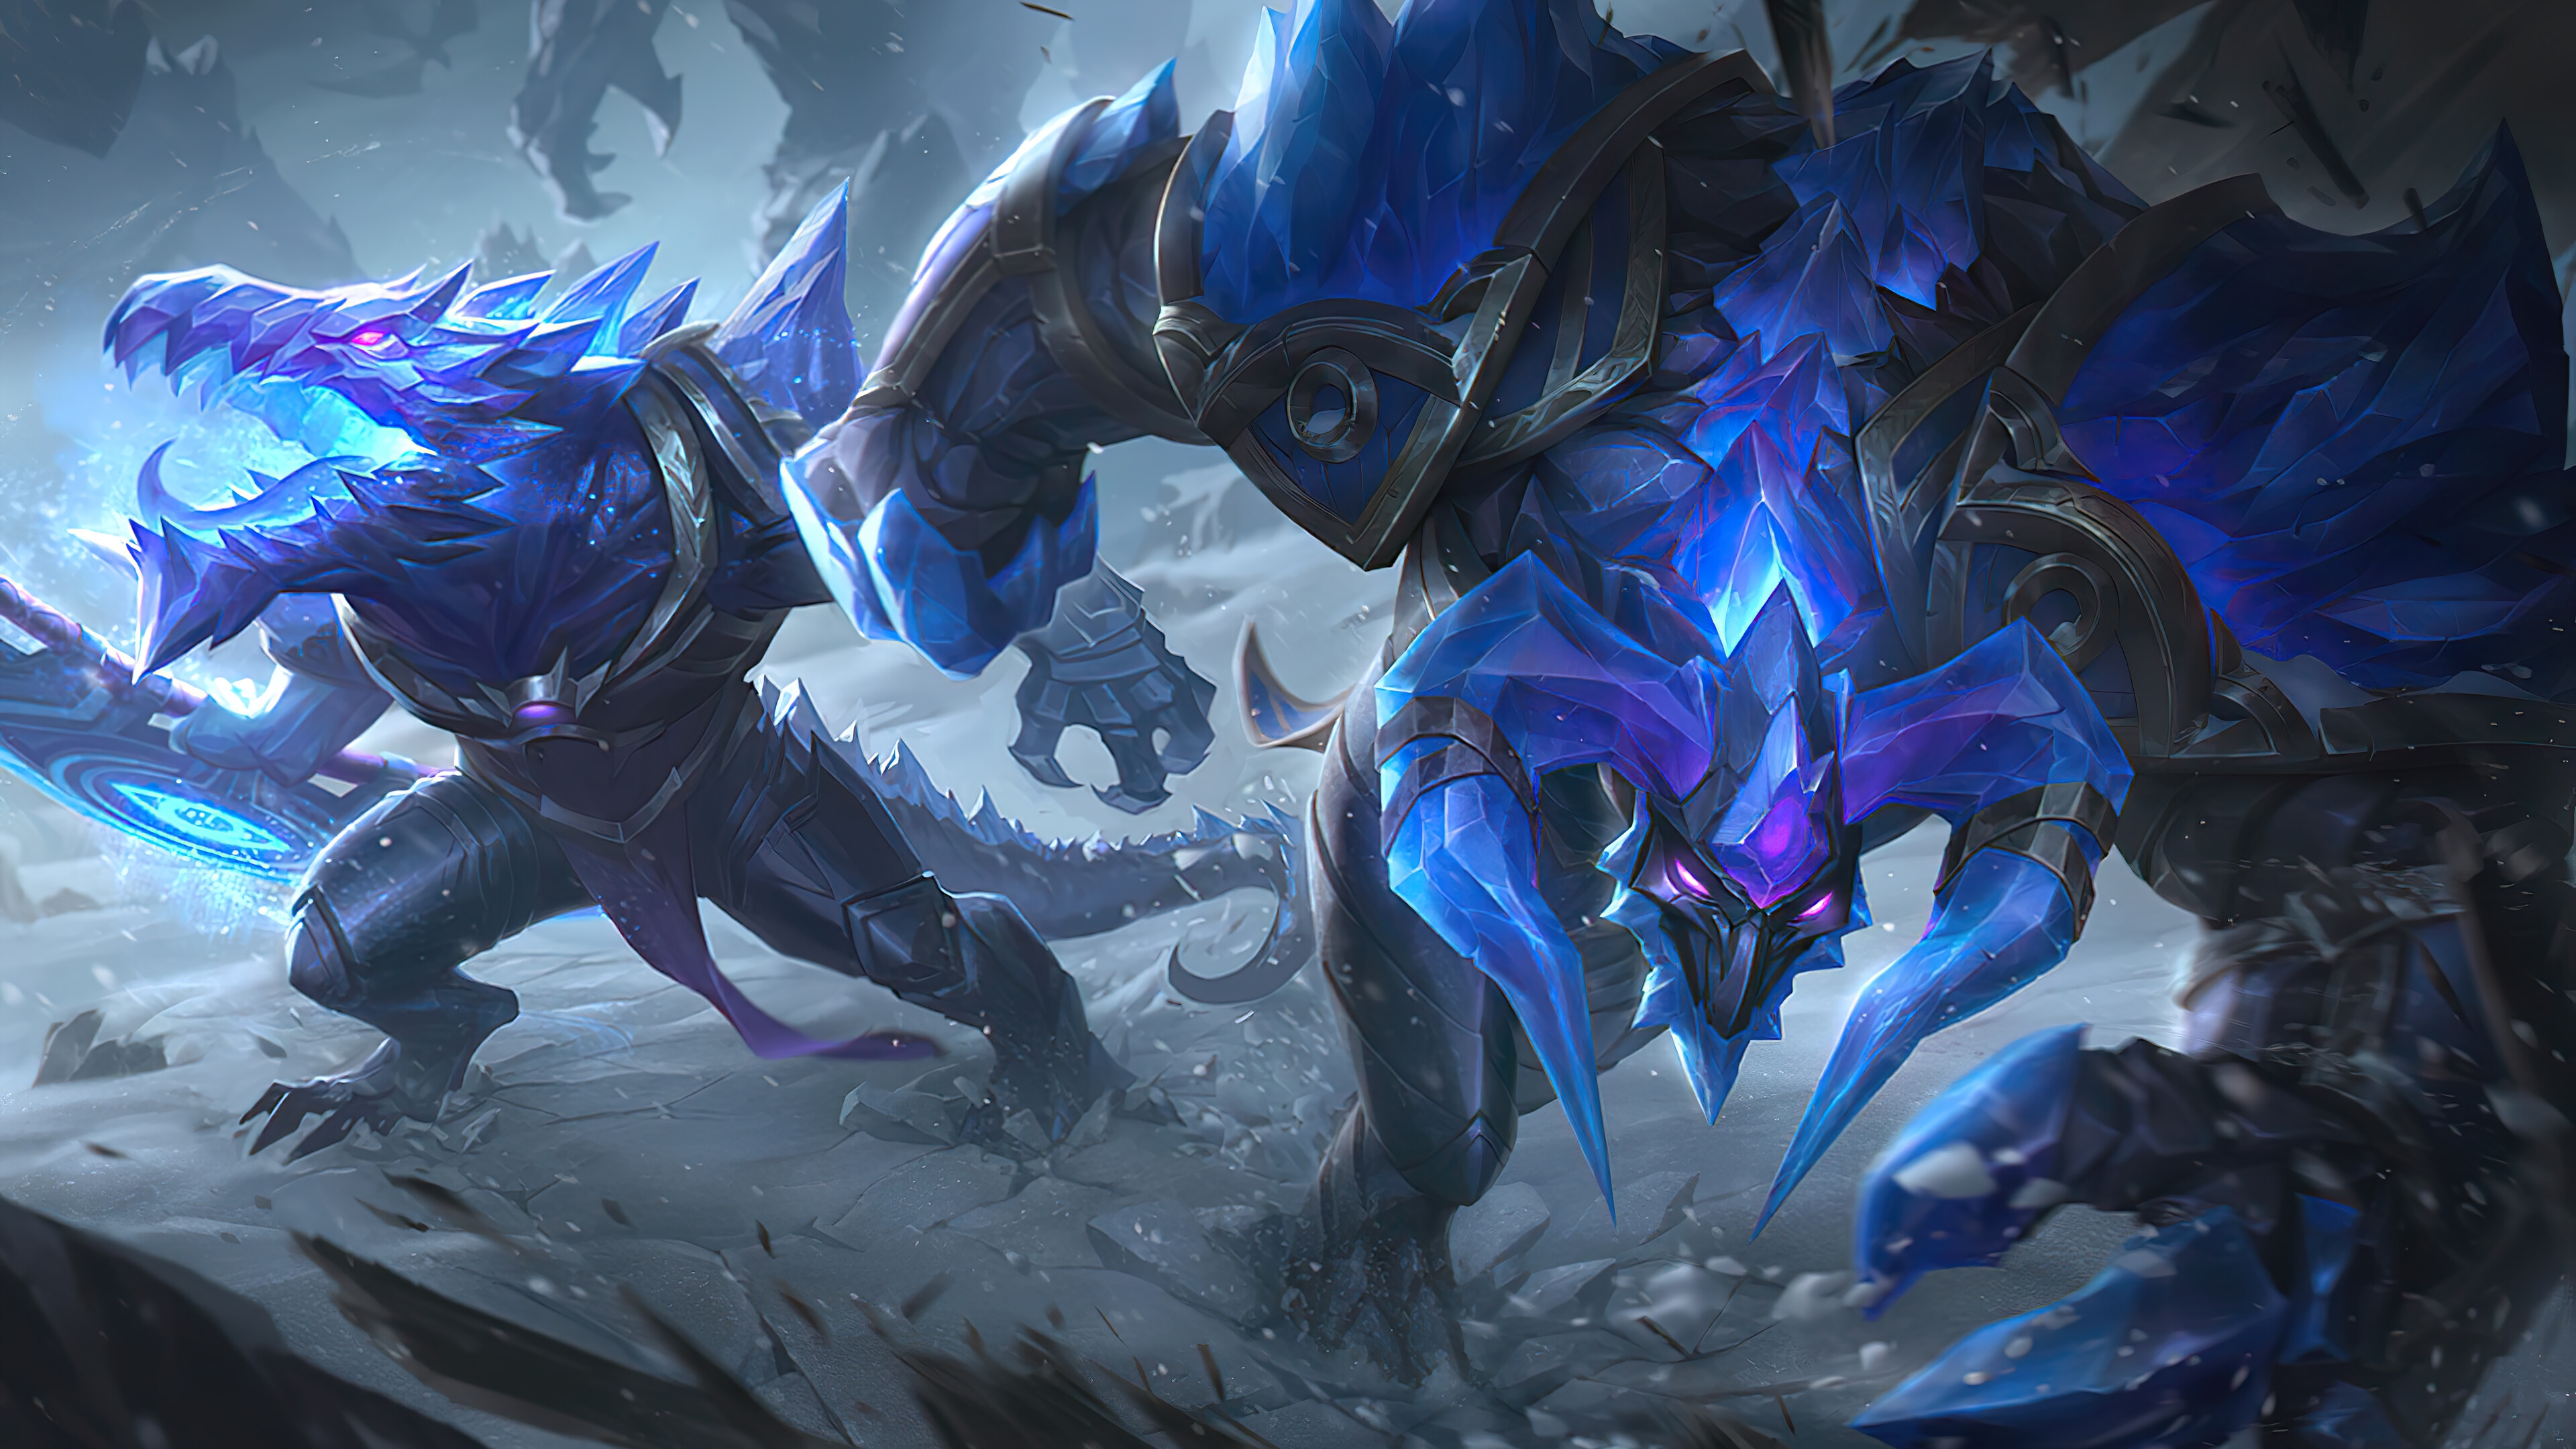 General 3840x2160 League of Legends Riot Games skin video game characters GZG Alistar (League of Legends) Renekton (League of Legends) PC gaming video game art